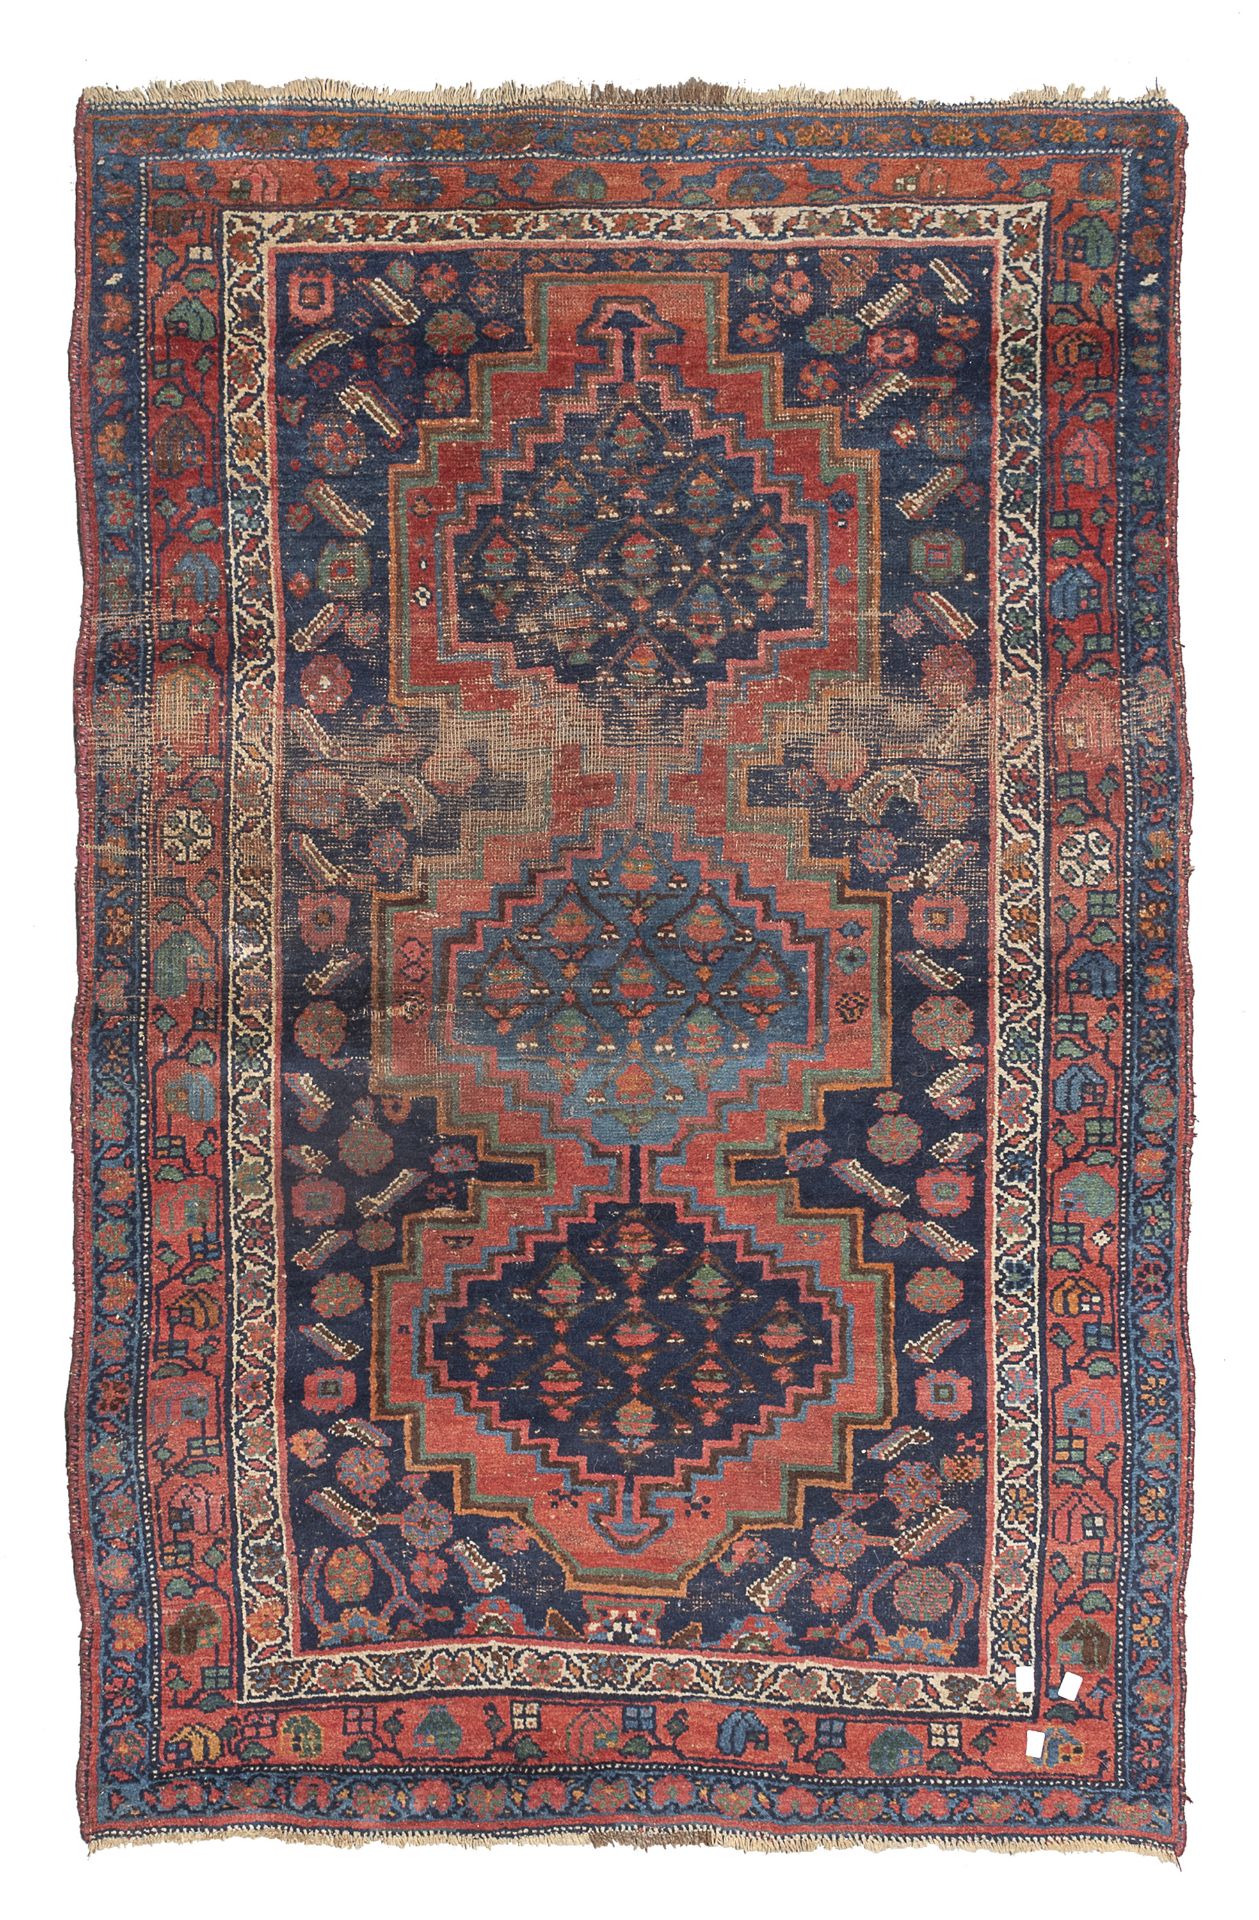 ANTIQUE MALAYER RUG EARLY 20TH CENTURY